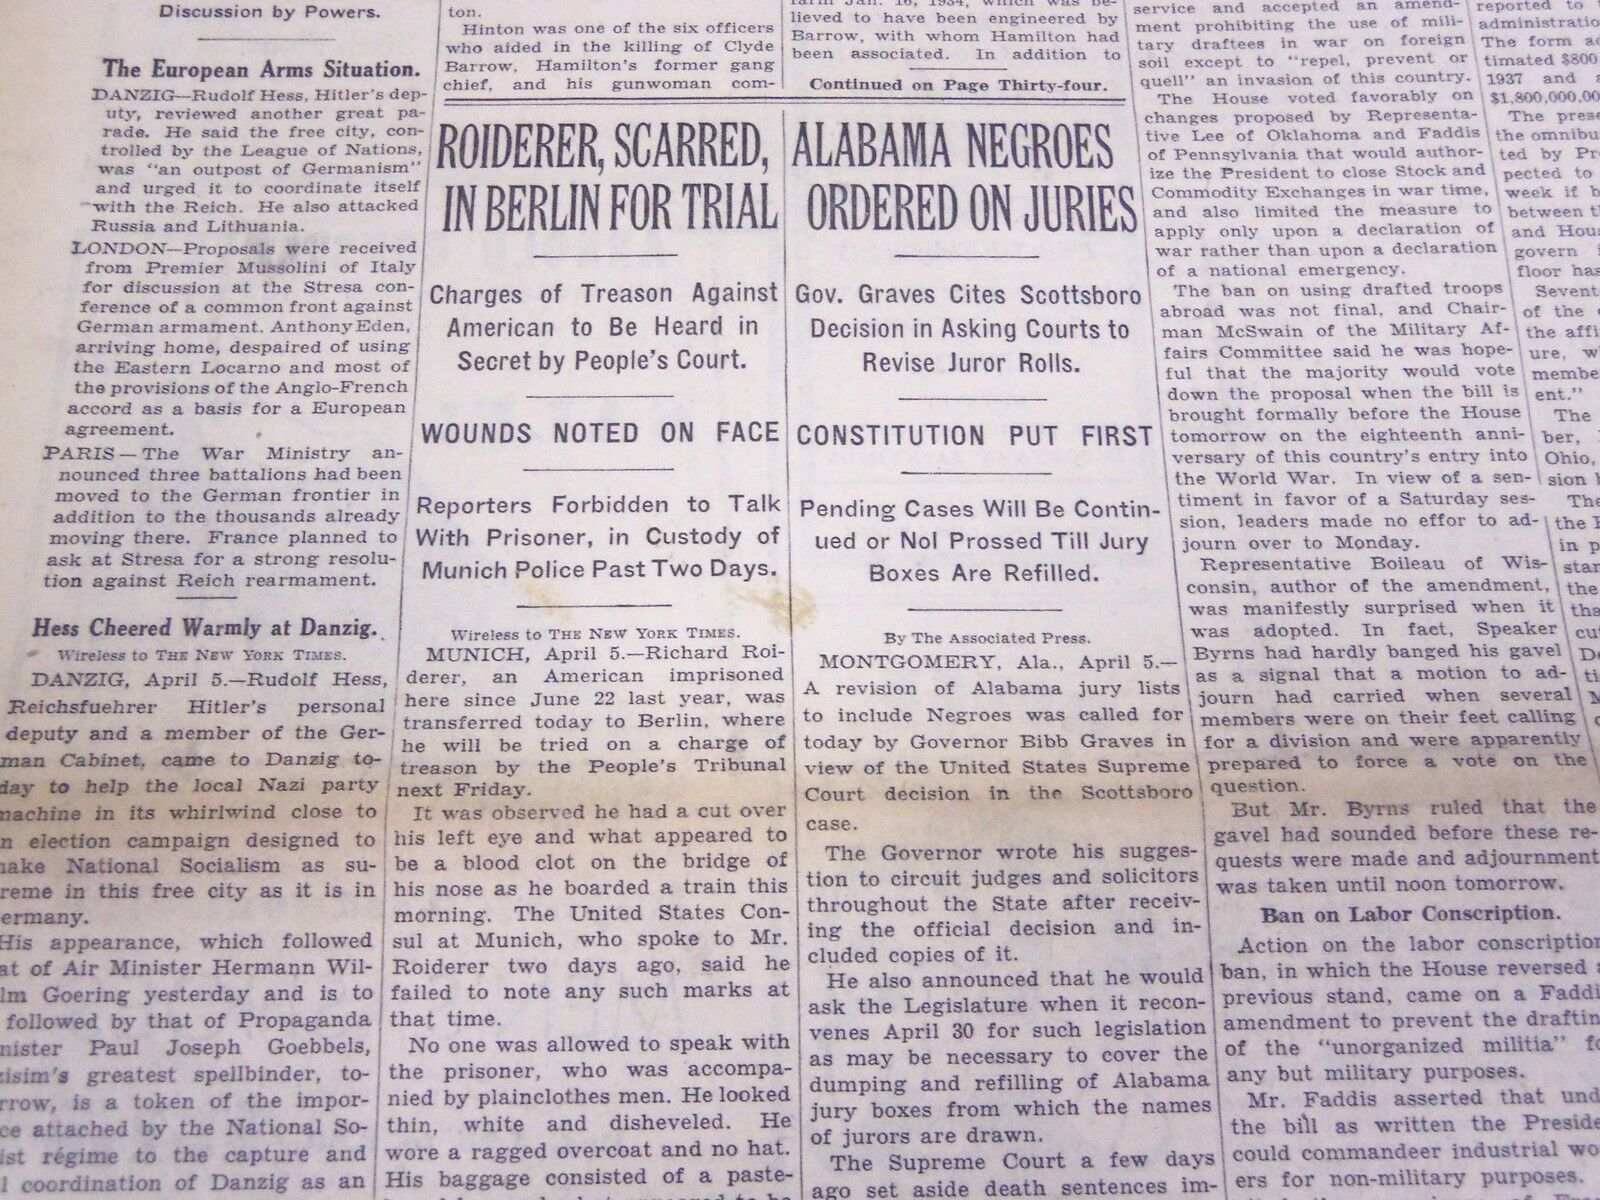 1935 APRIL 6 NEW YORK TIMES - ALABAMA NEGROES ORDERED ON JURIES - NT 3807